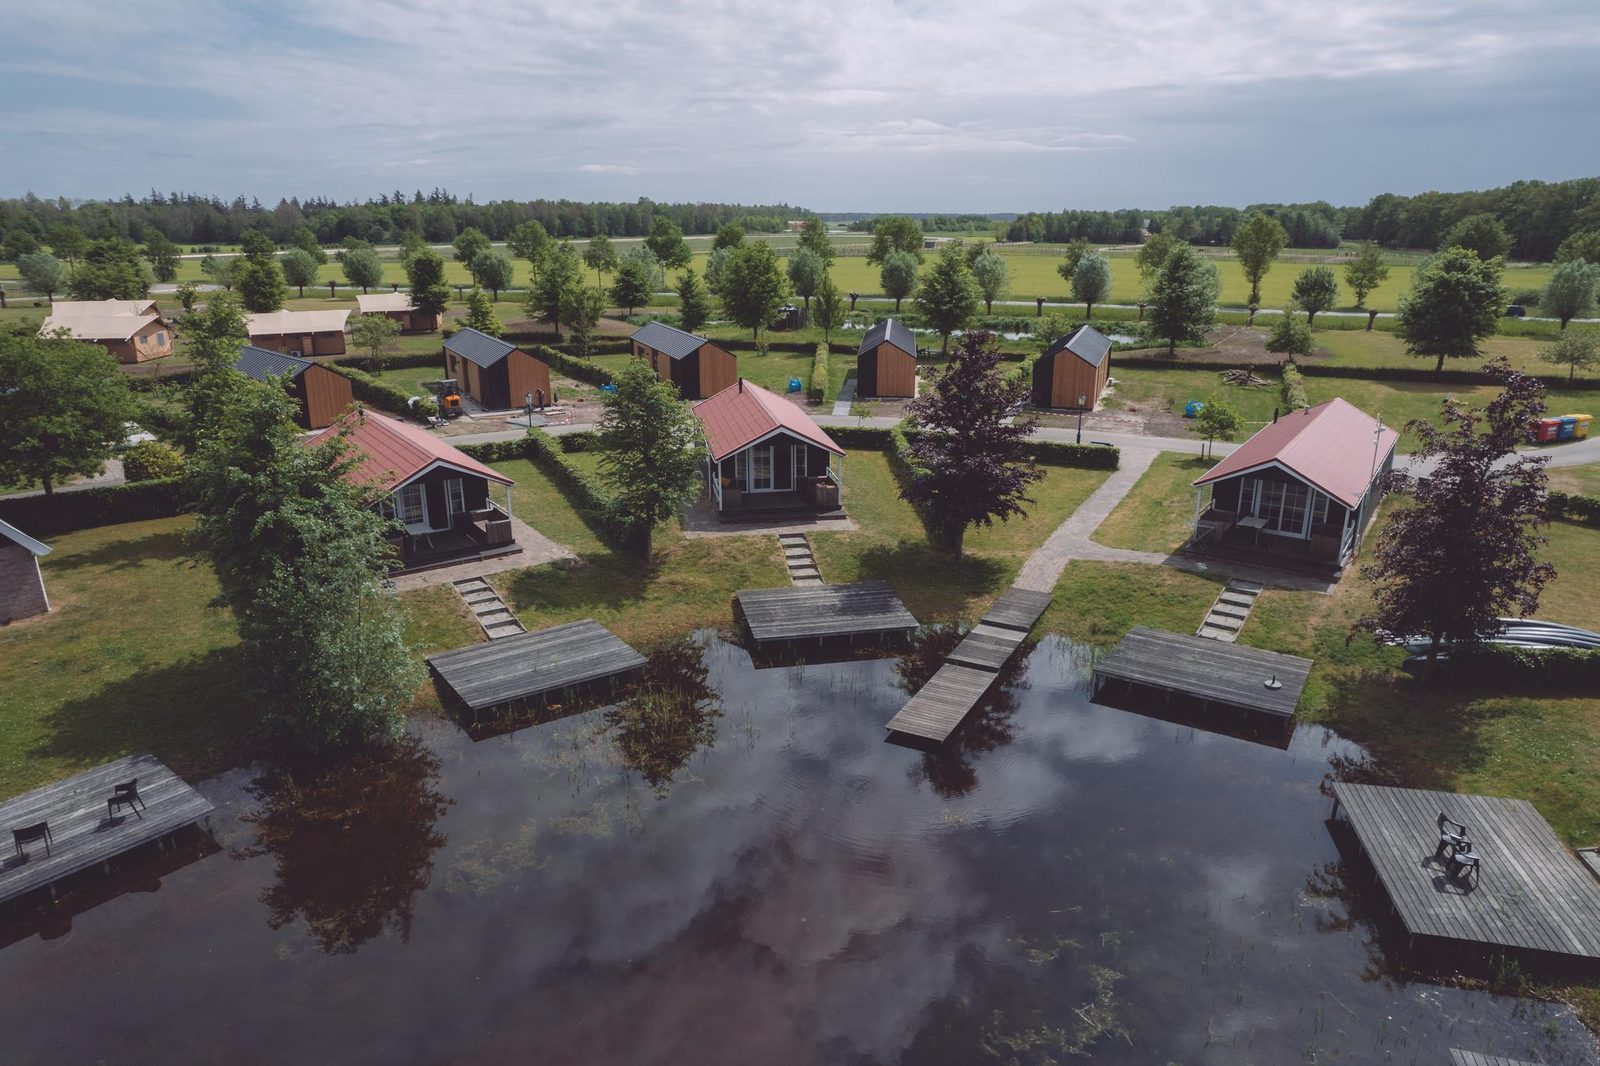 Group accommodation: group lodge + four 4-person lodges (16 people)